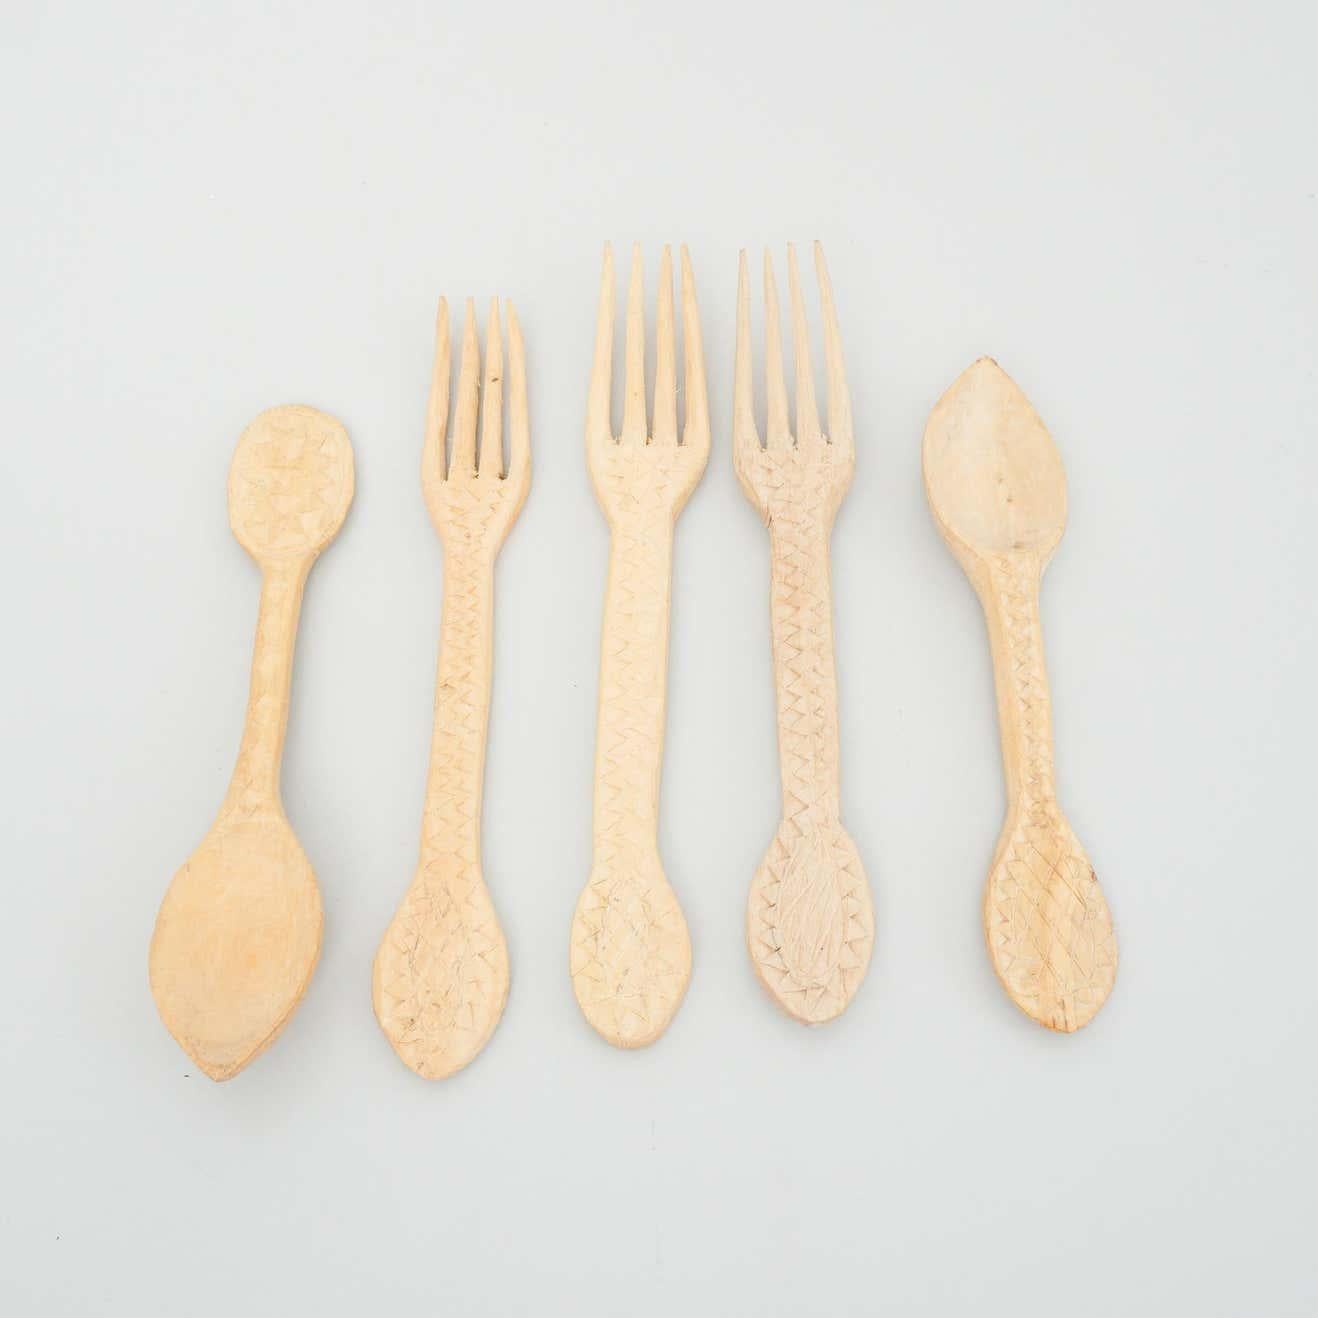 Set of rustic traditional hand carved forks and spoons, circa 1950
By Unknown Manufacturer, Spain.

In original condition with minor wear consisitent of age and use, preserving a beautiful patina.